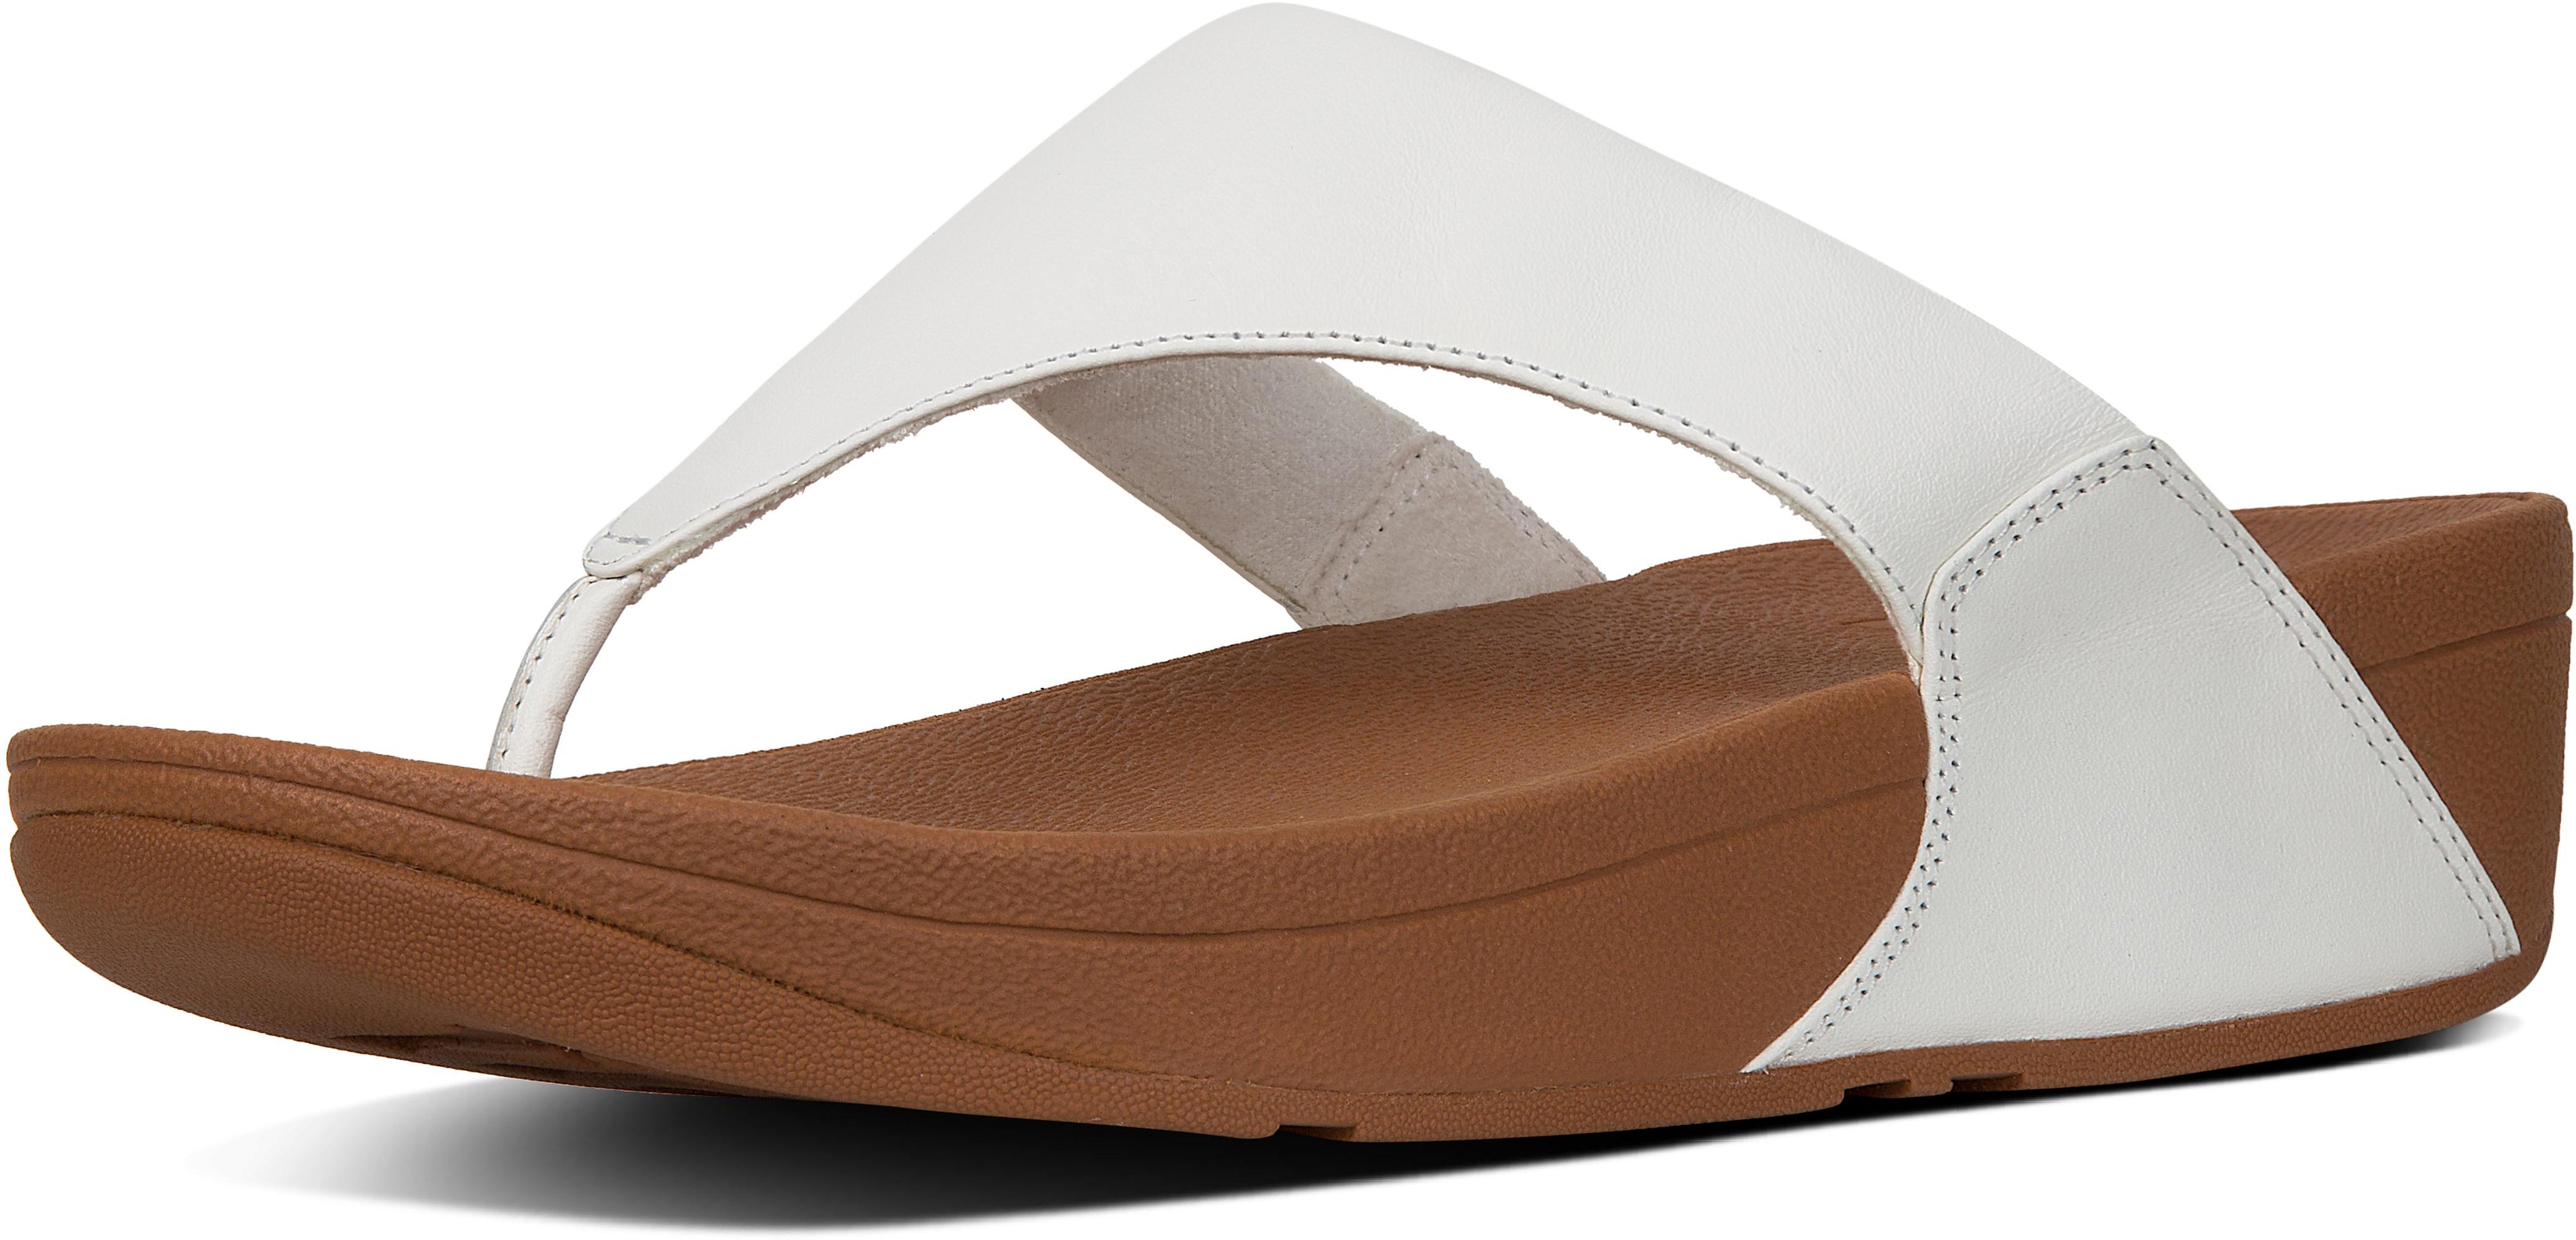 Lulu Leather Toepost in Urban White from the side